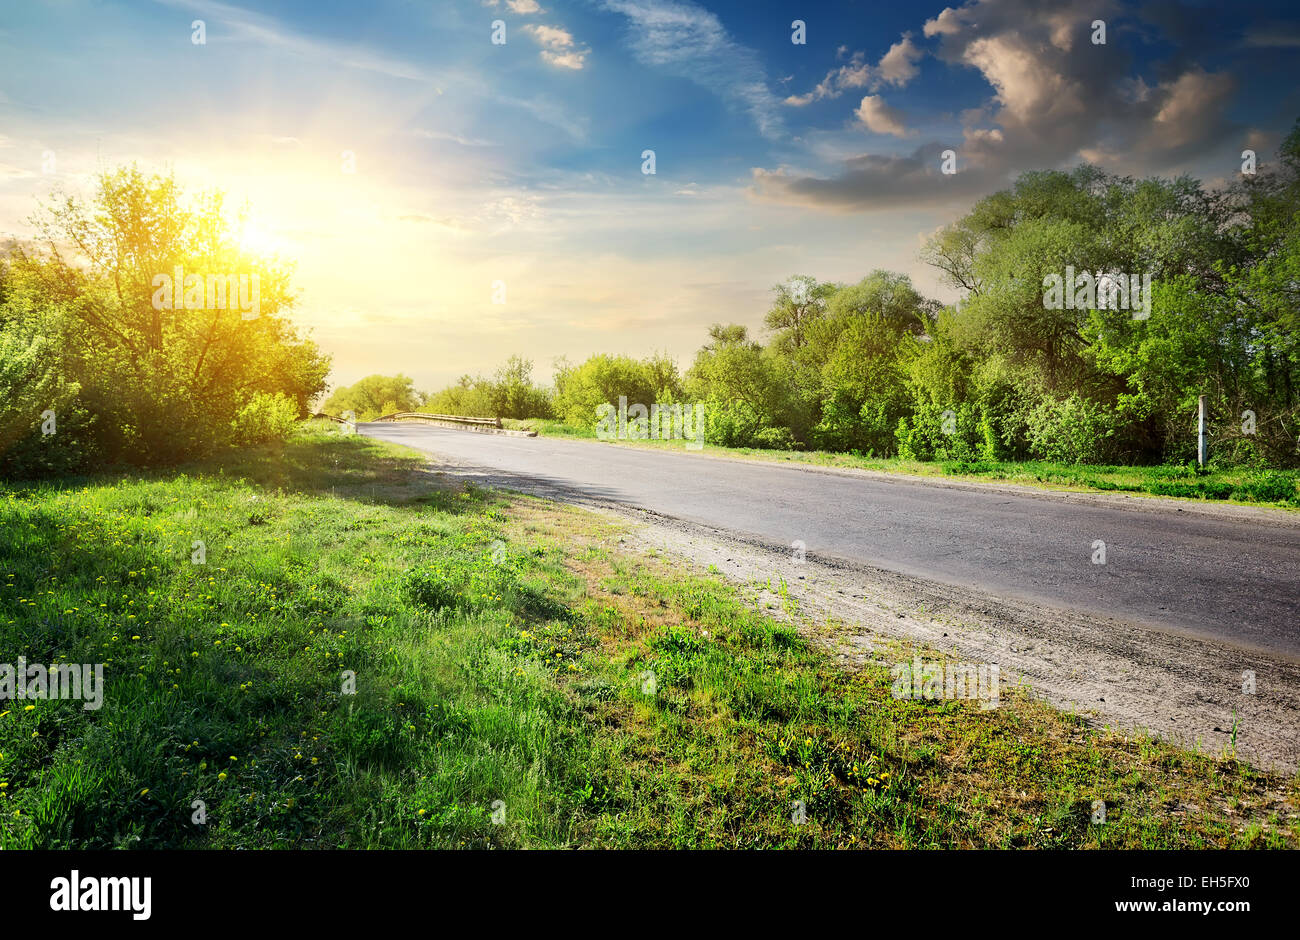 Green trees near asphalted road in sunny day Stock Photo